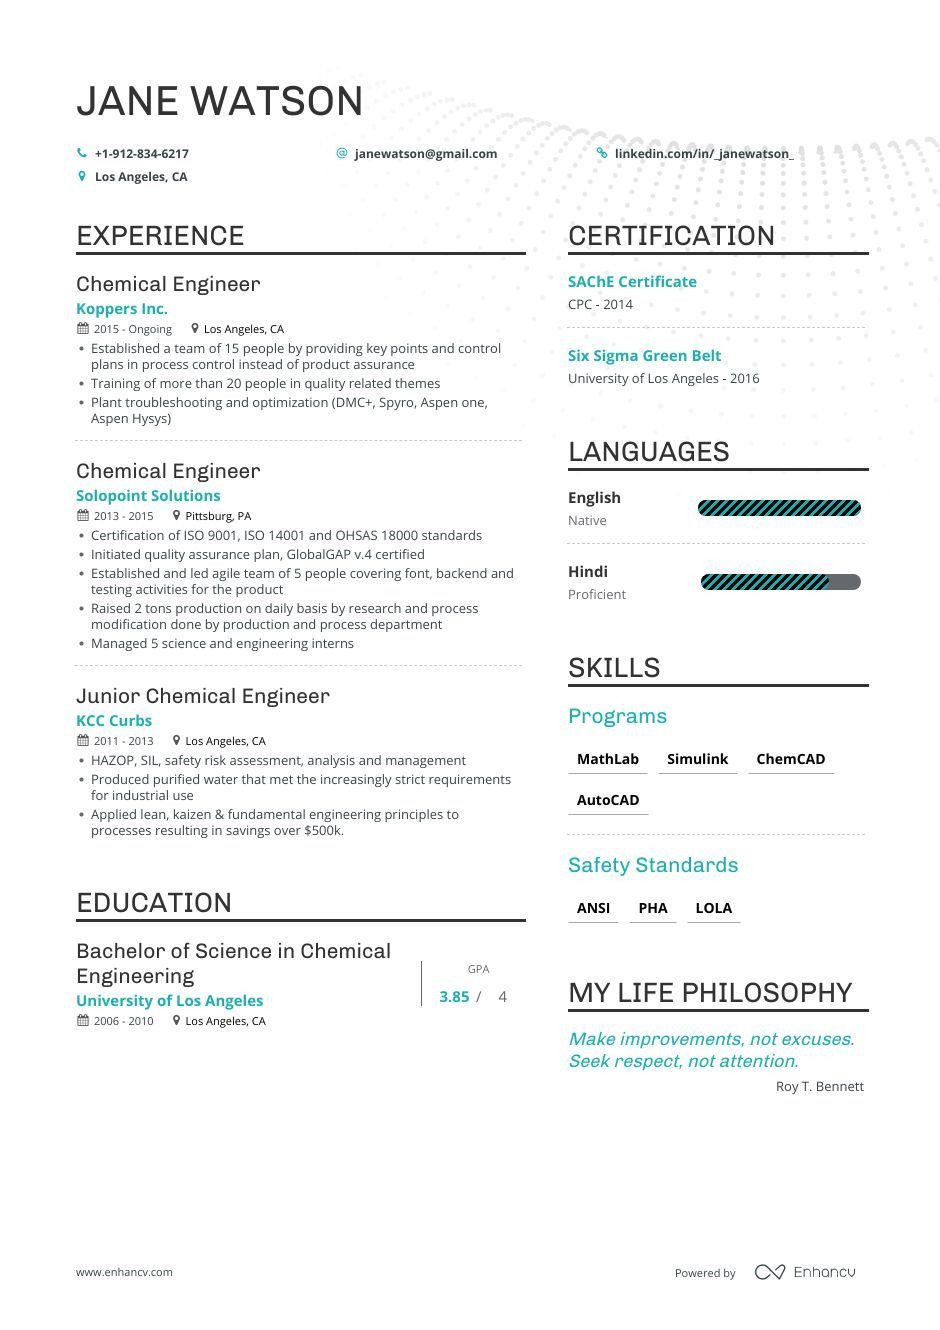 Resume Sample for Chemical Engineering Student 11 Chemical Engineer Resume Examples & Samples for 2019 …